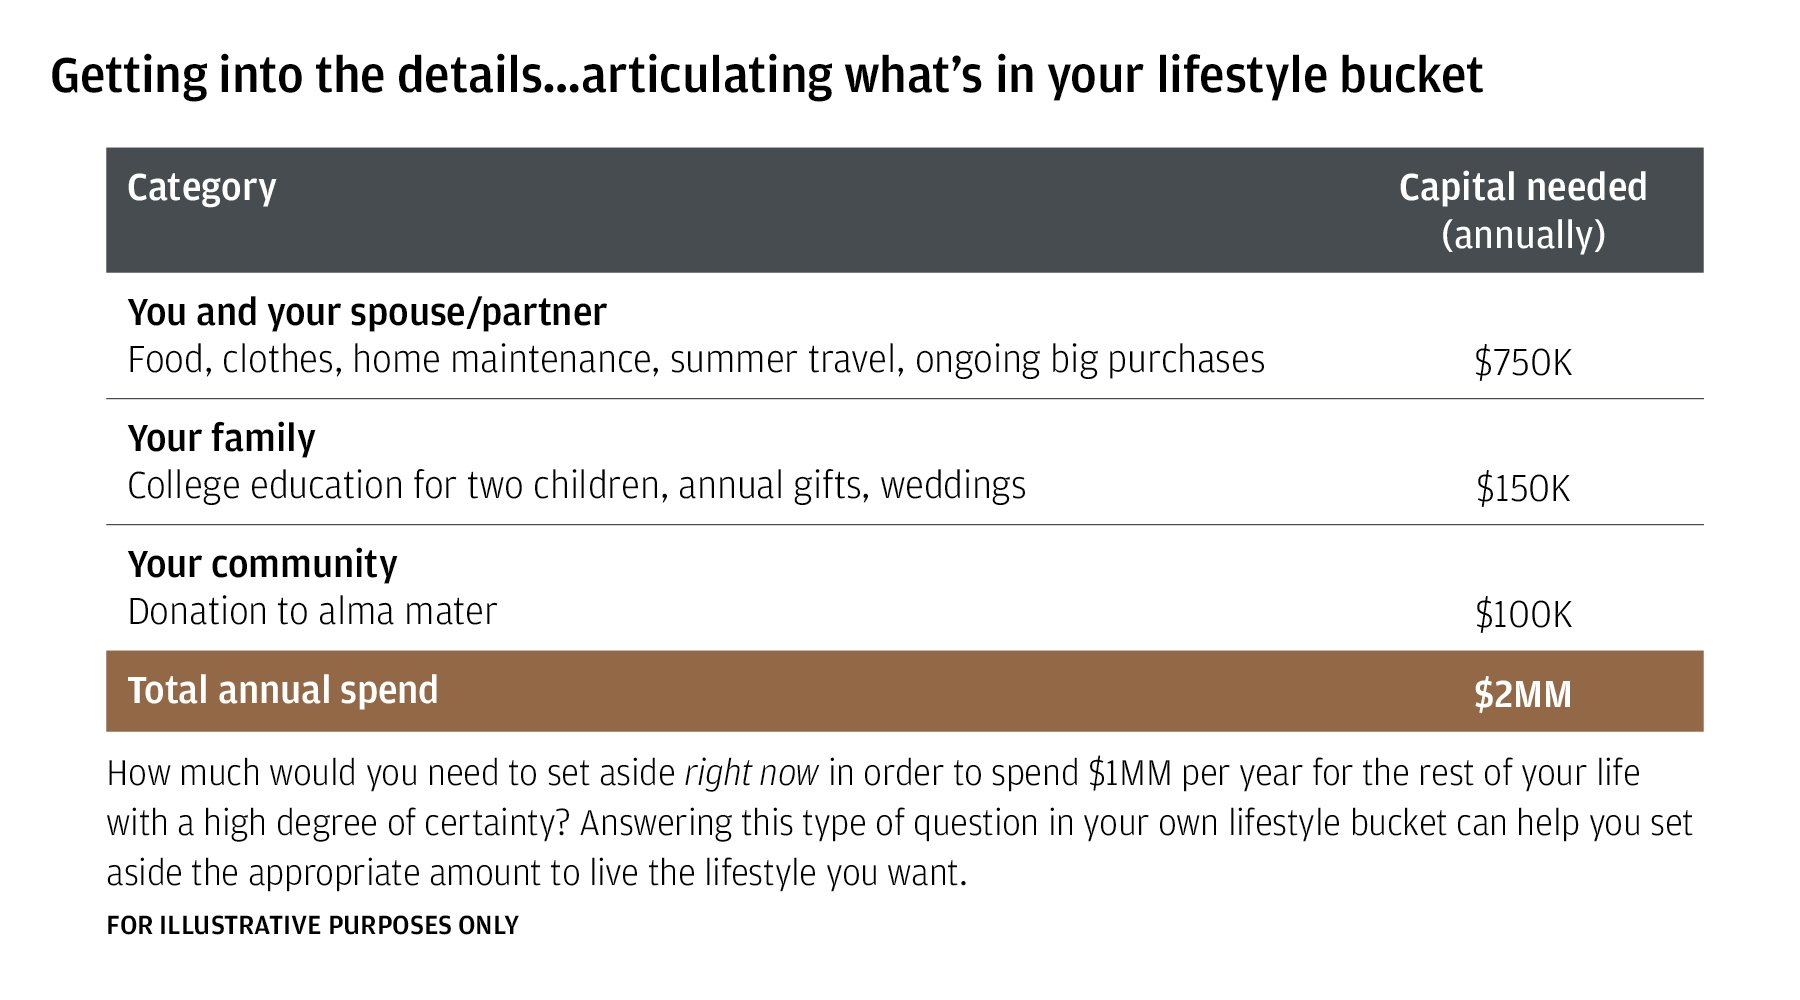 This chart provides an example to help articulate what‚Äôs in your lifestyle bucket. For instance, you can add up the capital needed (annually) for you and your spouse/partner (e.g., food, clothes), your family (e.g., college education), and your community (e.g., donation to alma mater) to calculate your total annual spend. How much do you need to set aside right now in order to spend with a high degree of certainty this amount per year for the rest of your life? 